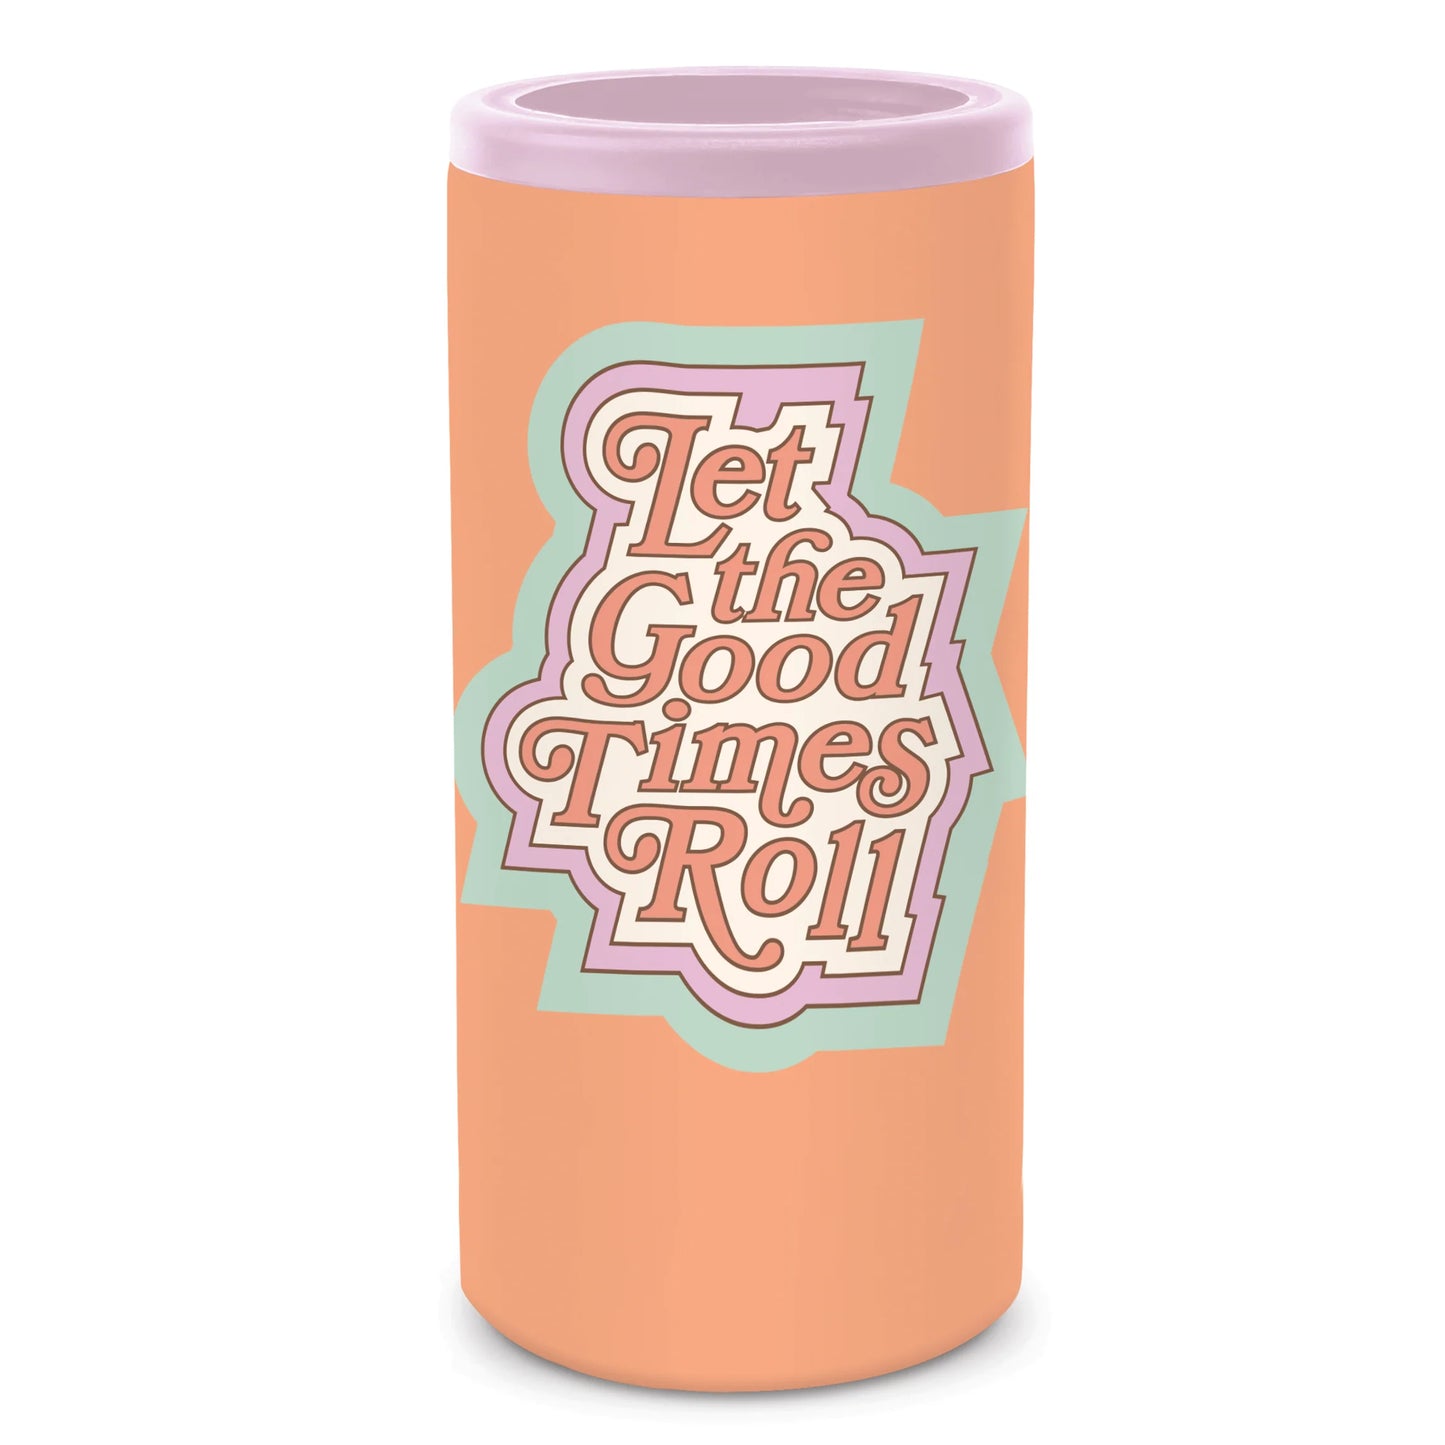 Studio Oh! - Let the Good Times Roll Insulated Stainless Steel Slim-Can Cooler